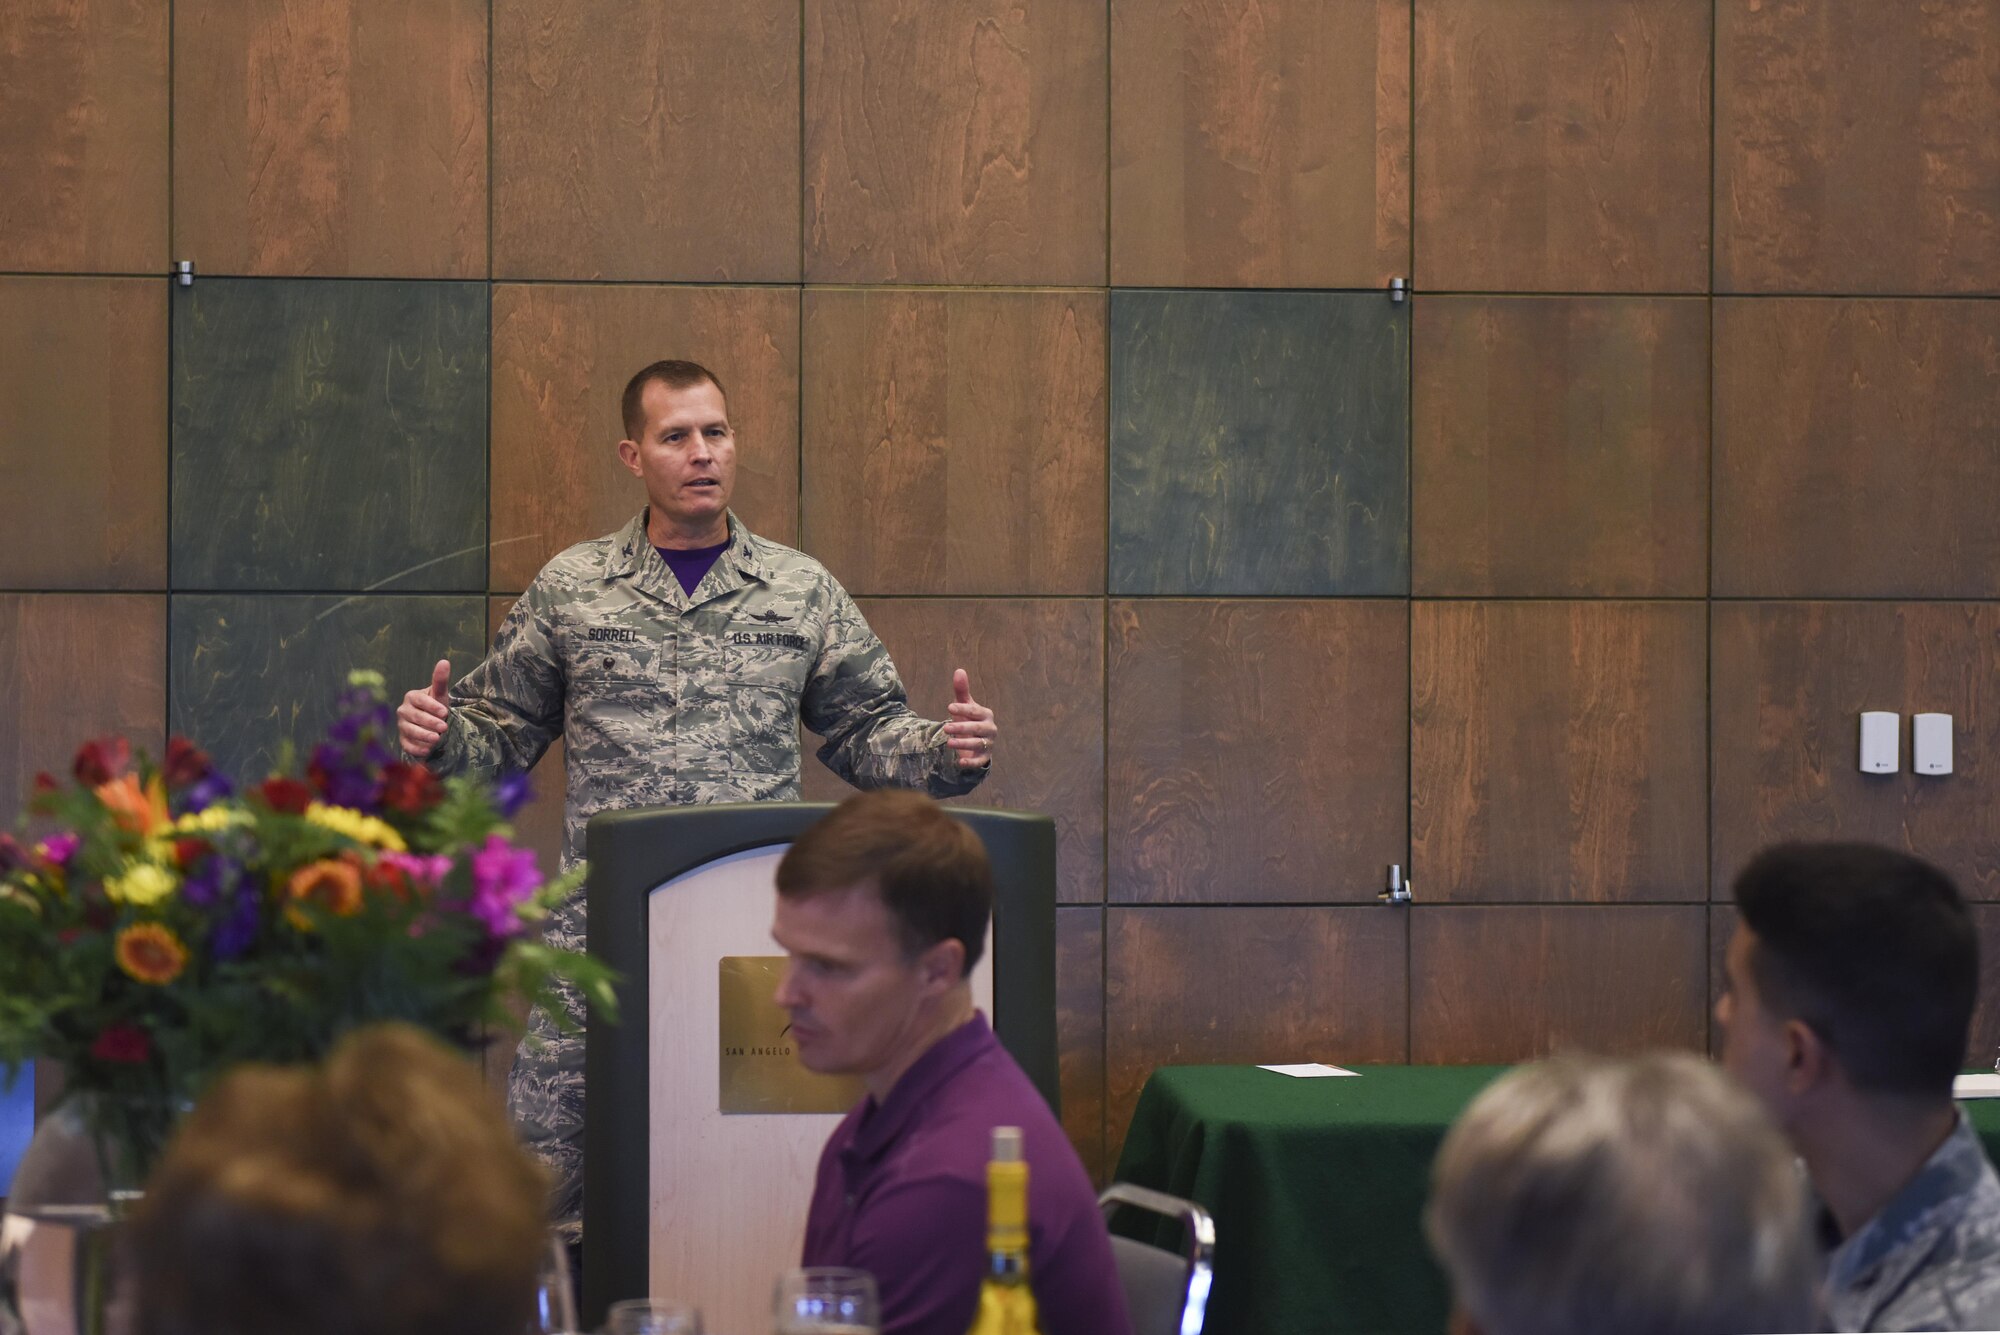 U.S. Air Force Col. Jeffrey Sorrell, 17th Training Wing vice commander, speaks to San Angelo civic leaders about the STARBASE program at the San Angelo Museum of Fine Arts, San Angelo, Texas, Aug. 11, 2017. The program engages elementary students through hands-on experiential activities like metric measurement, estimation, calculation geometry and data analysis. (U.S. Air Force photo by Airman 1st Class Chase Sousa/Released)